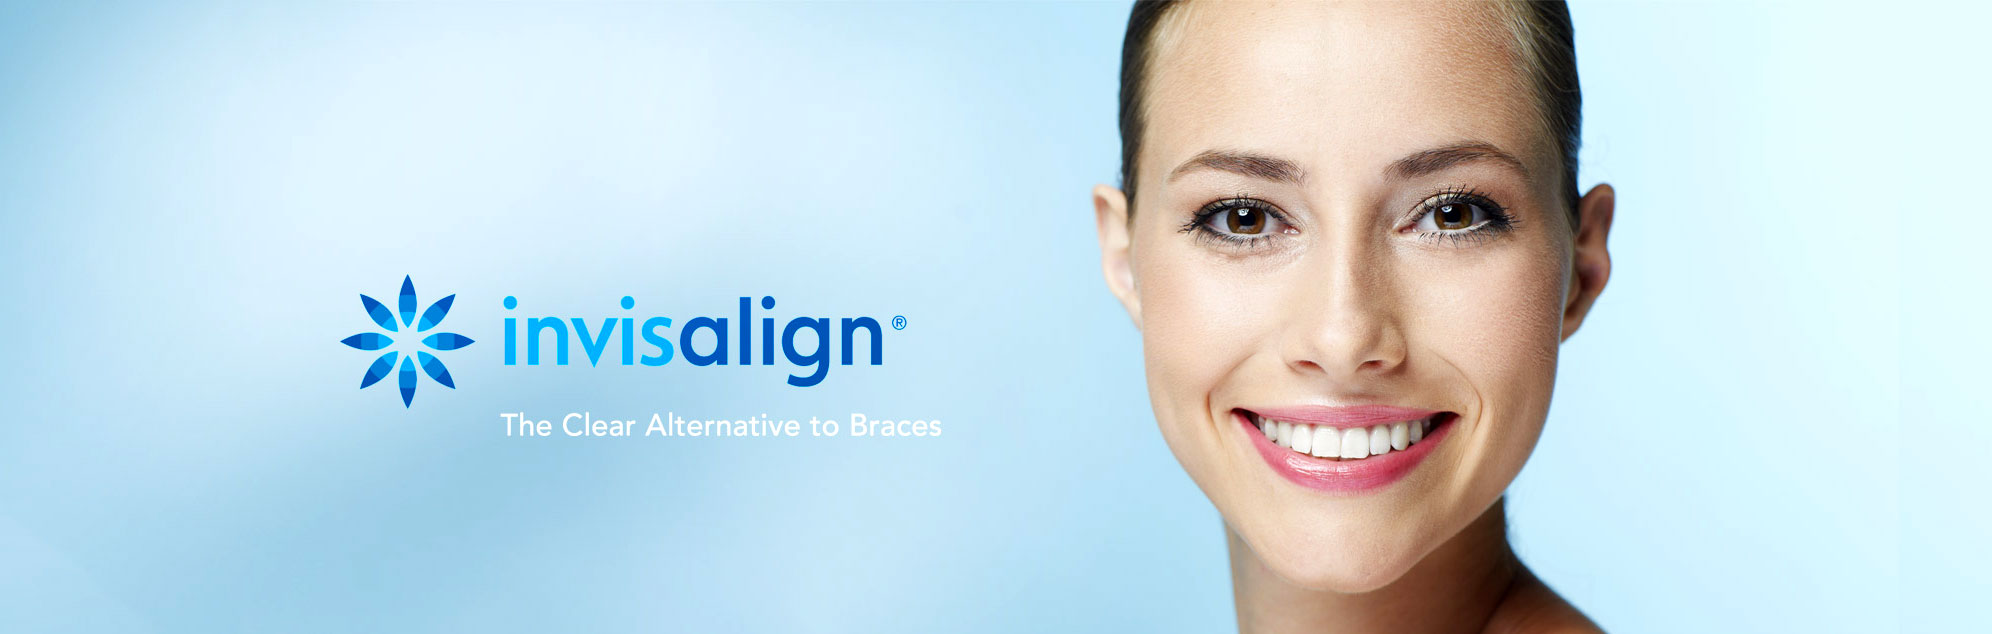 INVISALIGN from the best invisalign dentist nyc takes a pure approach to straightening teeth